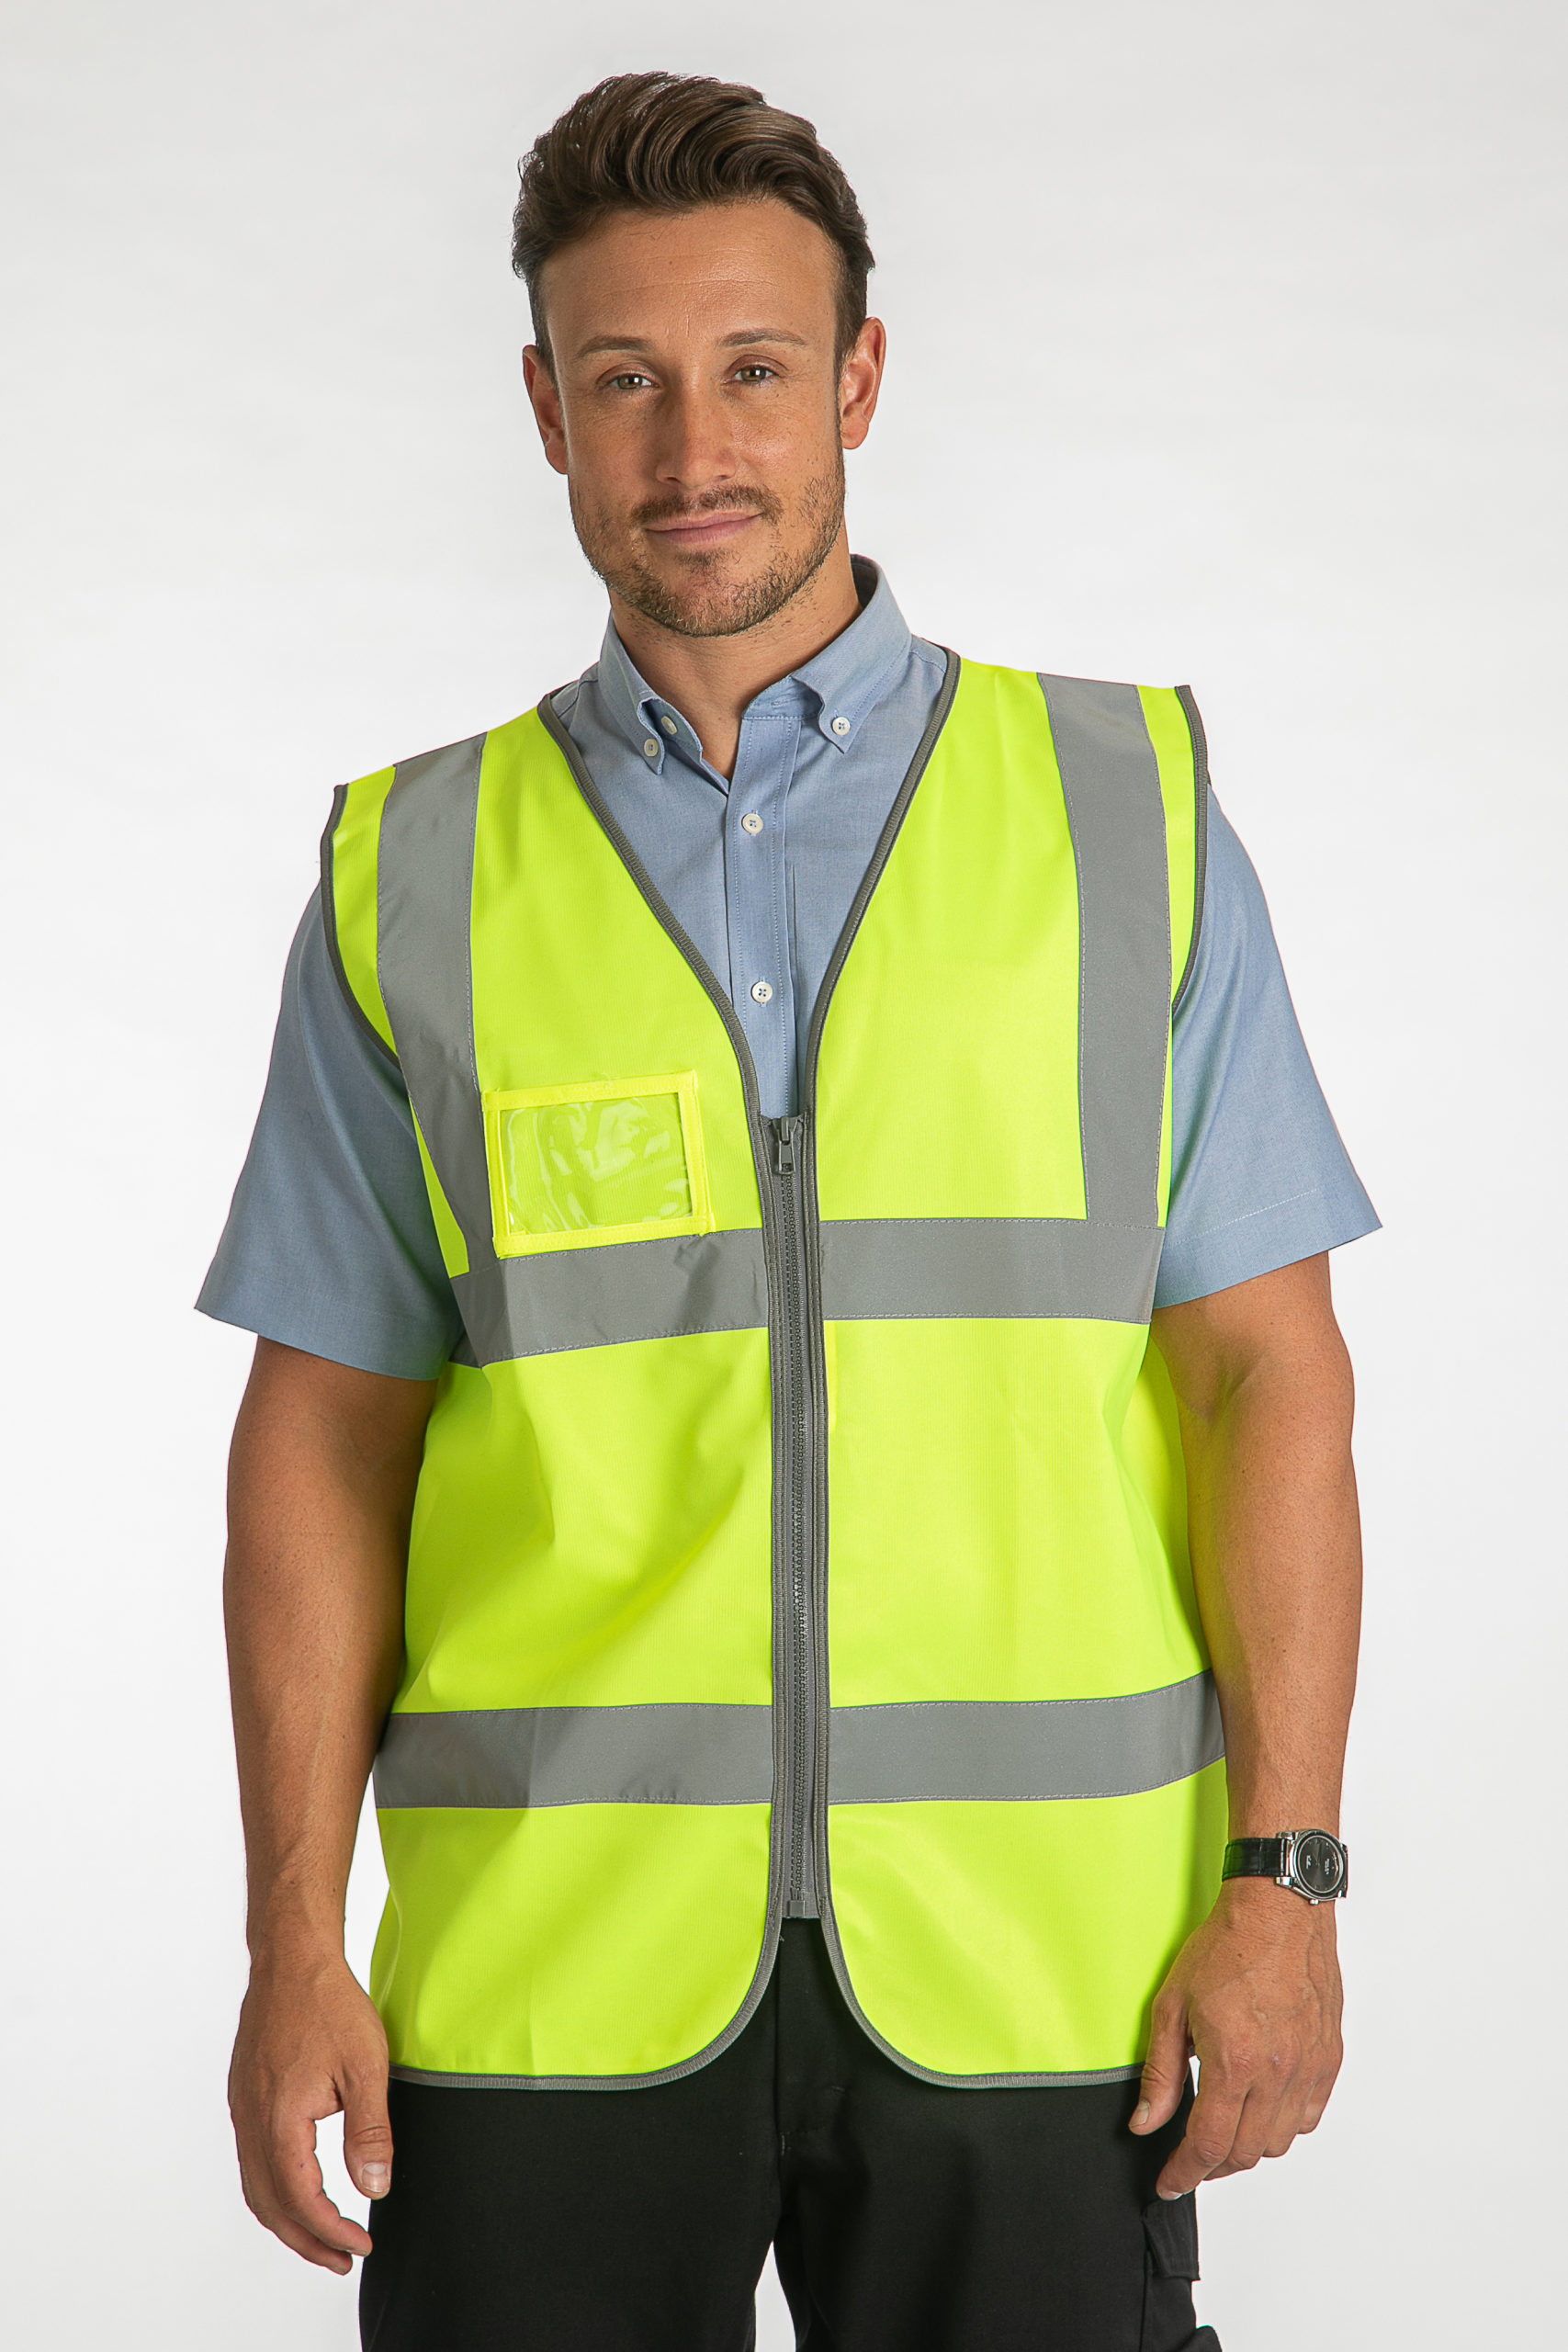 Zipped Air Crew Class 2 Hi Visibility Waistcoat. - Armstrong Aviation  Clothing